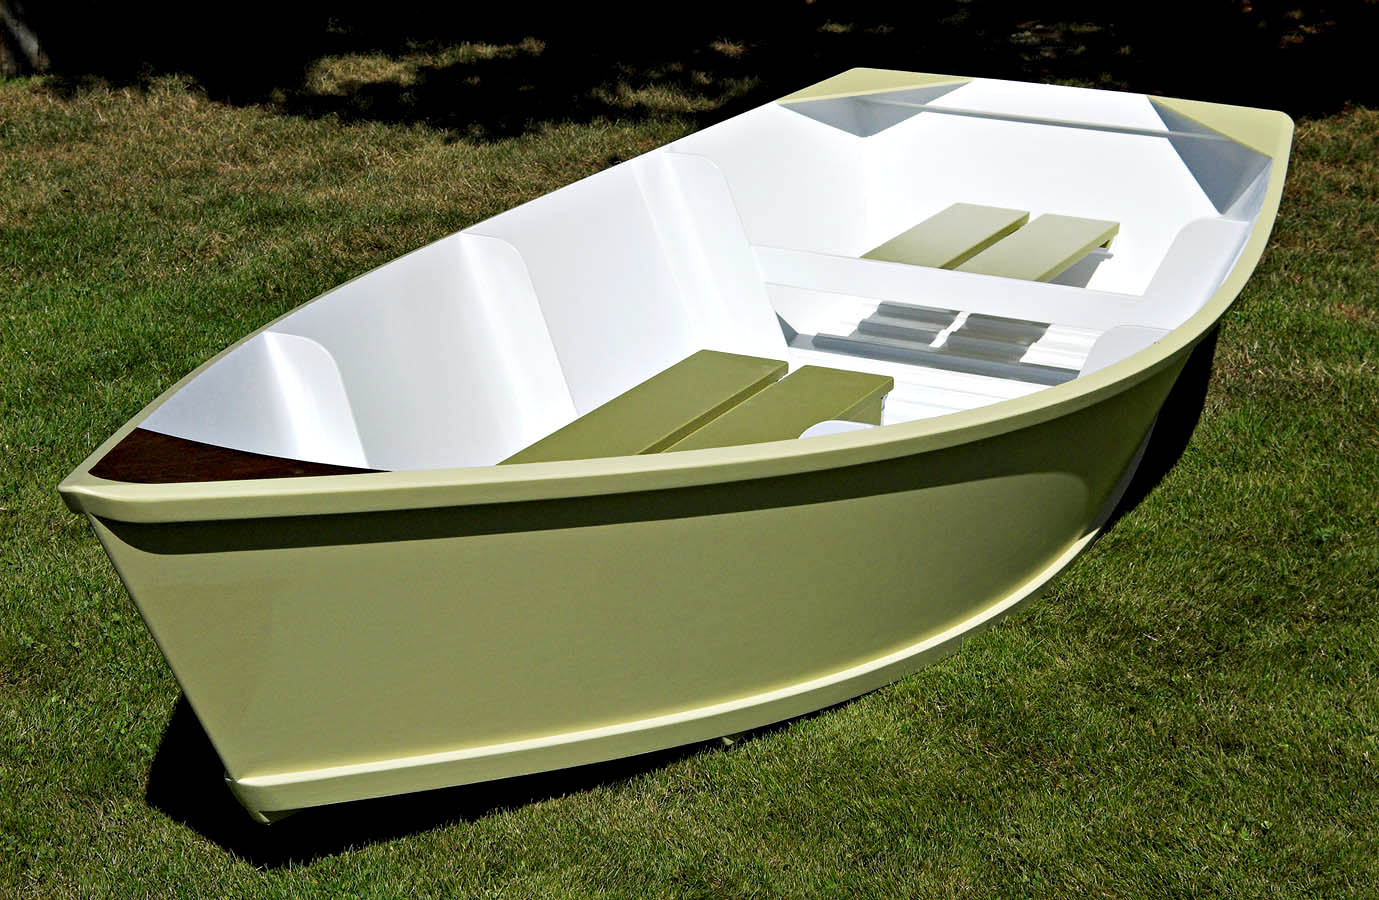 Boat Plywood Skiff Plans | How To Building Amazing DIY Boat